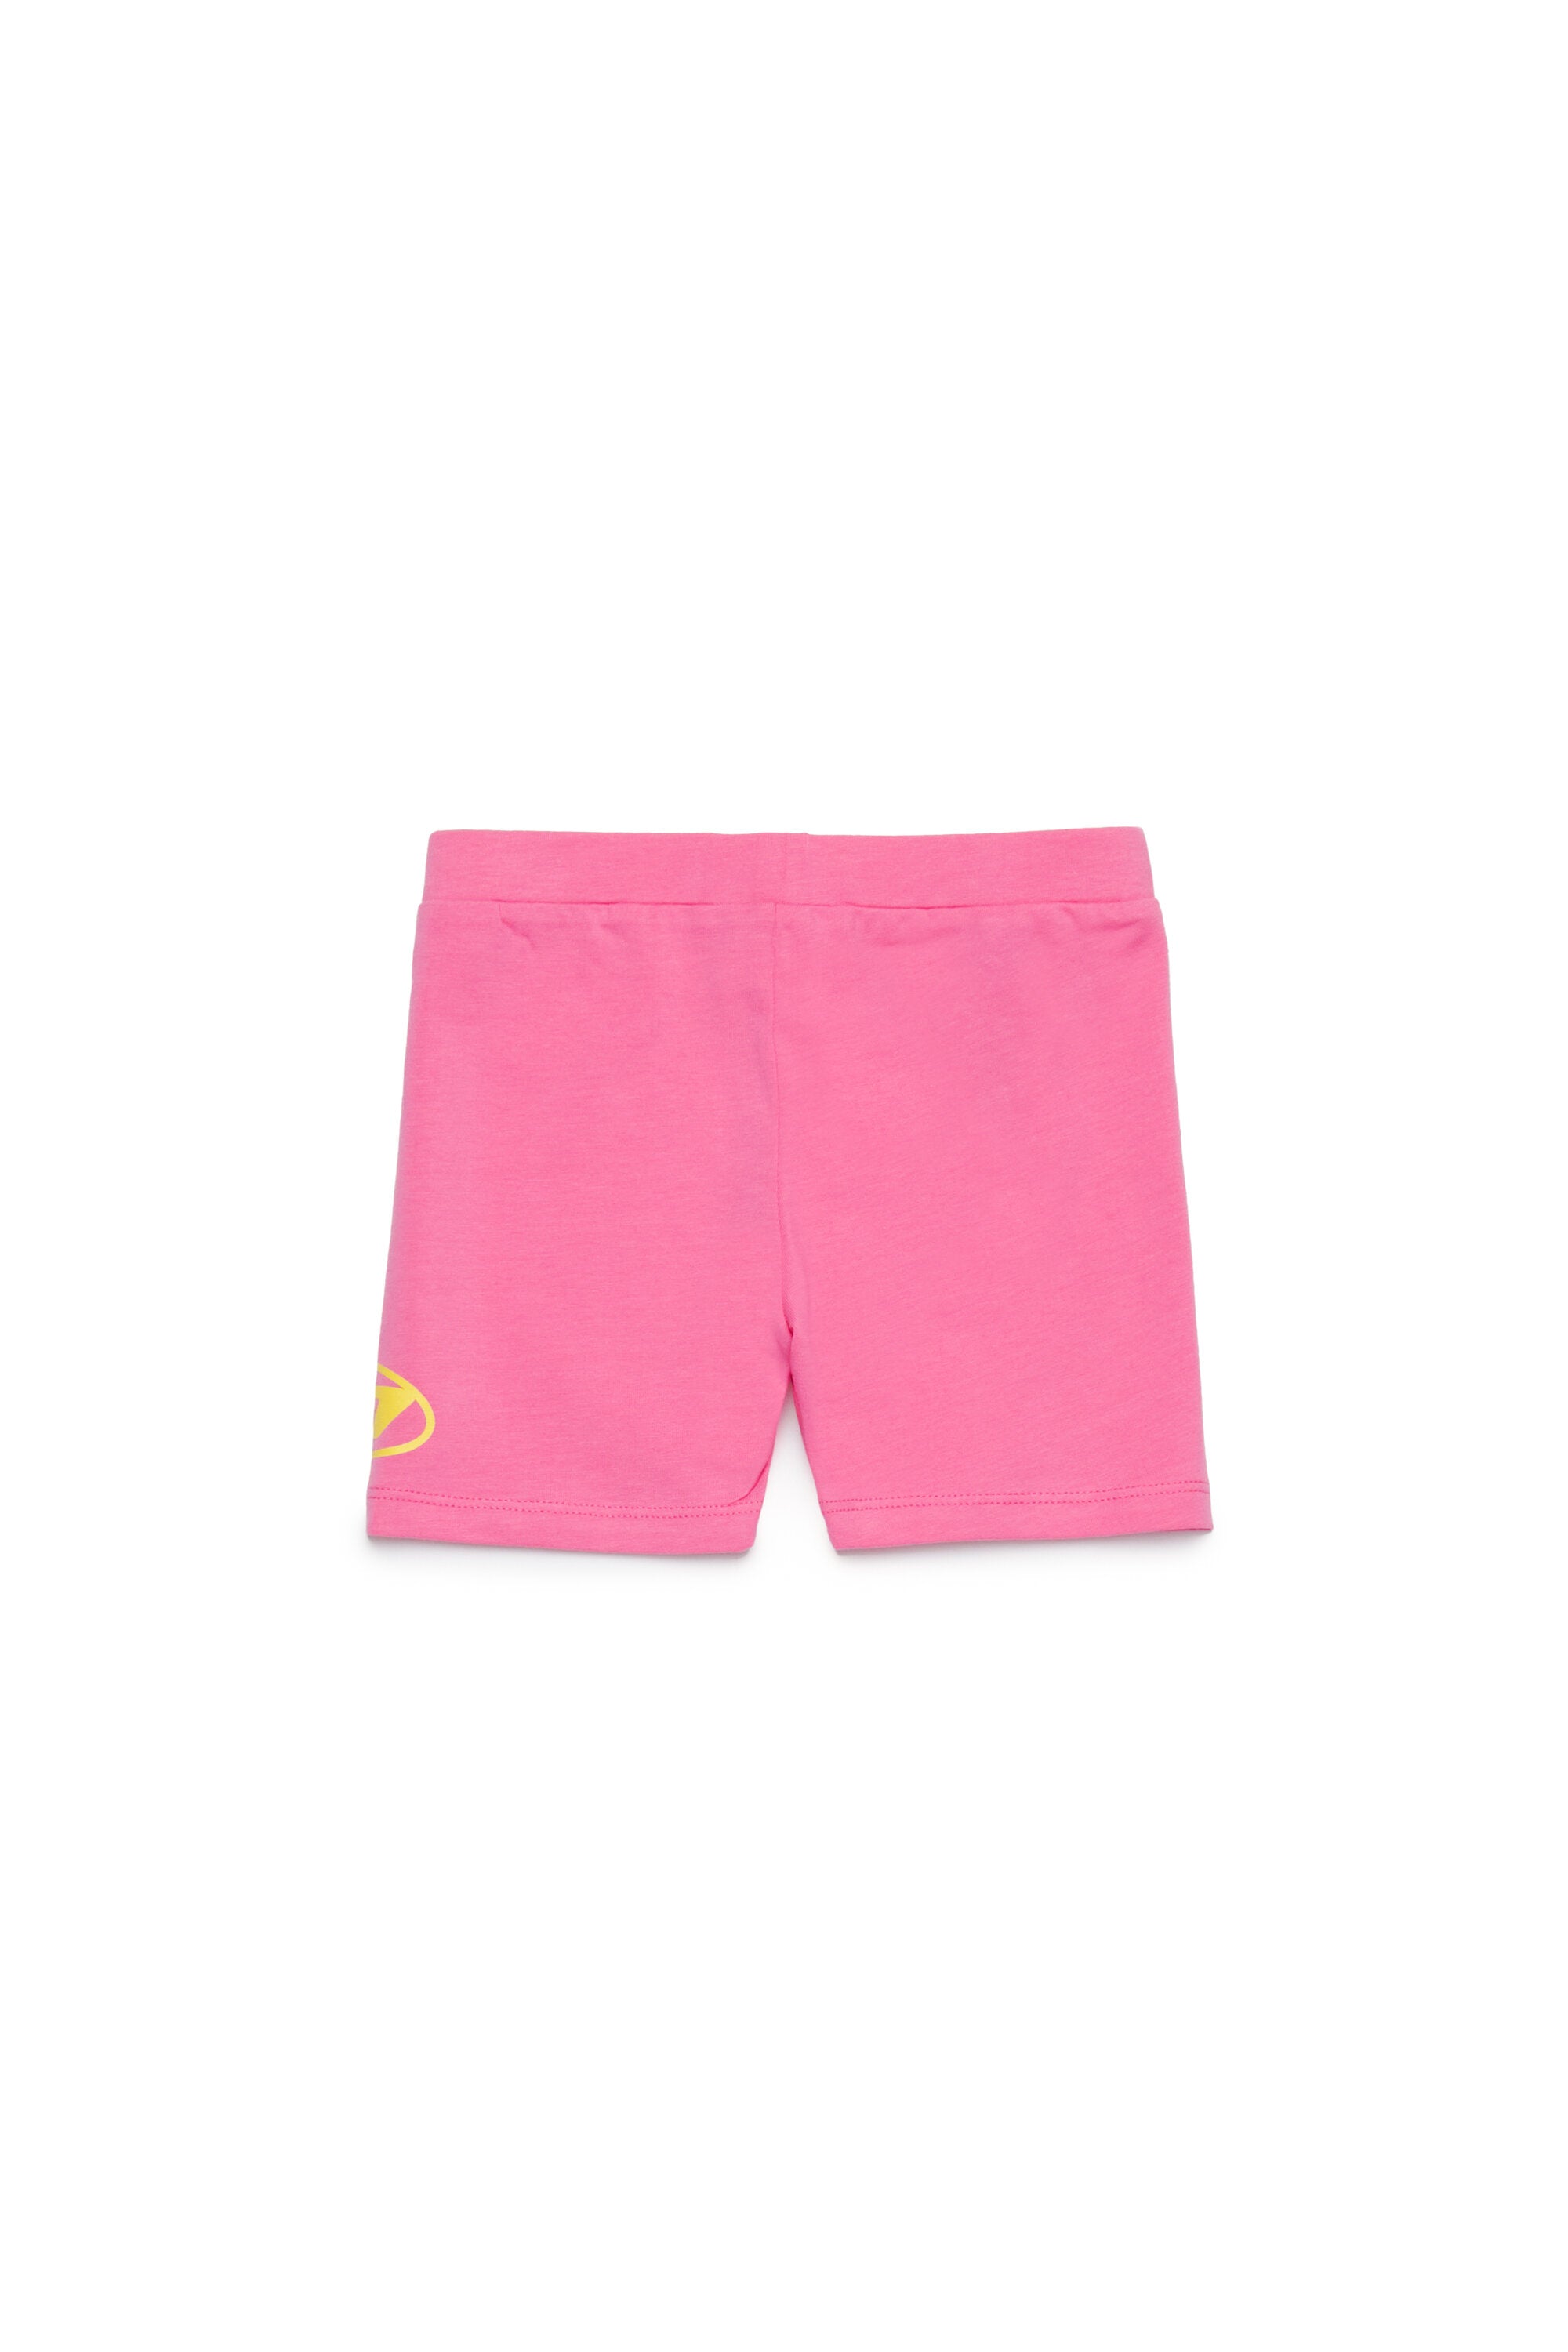 Cotton shorts with Oval D logo